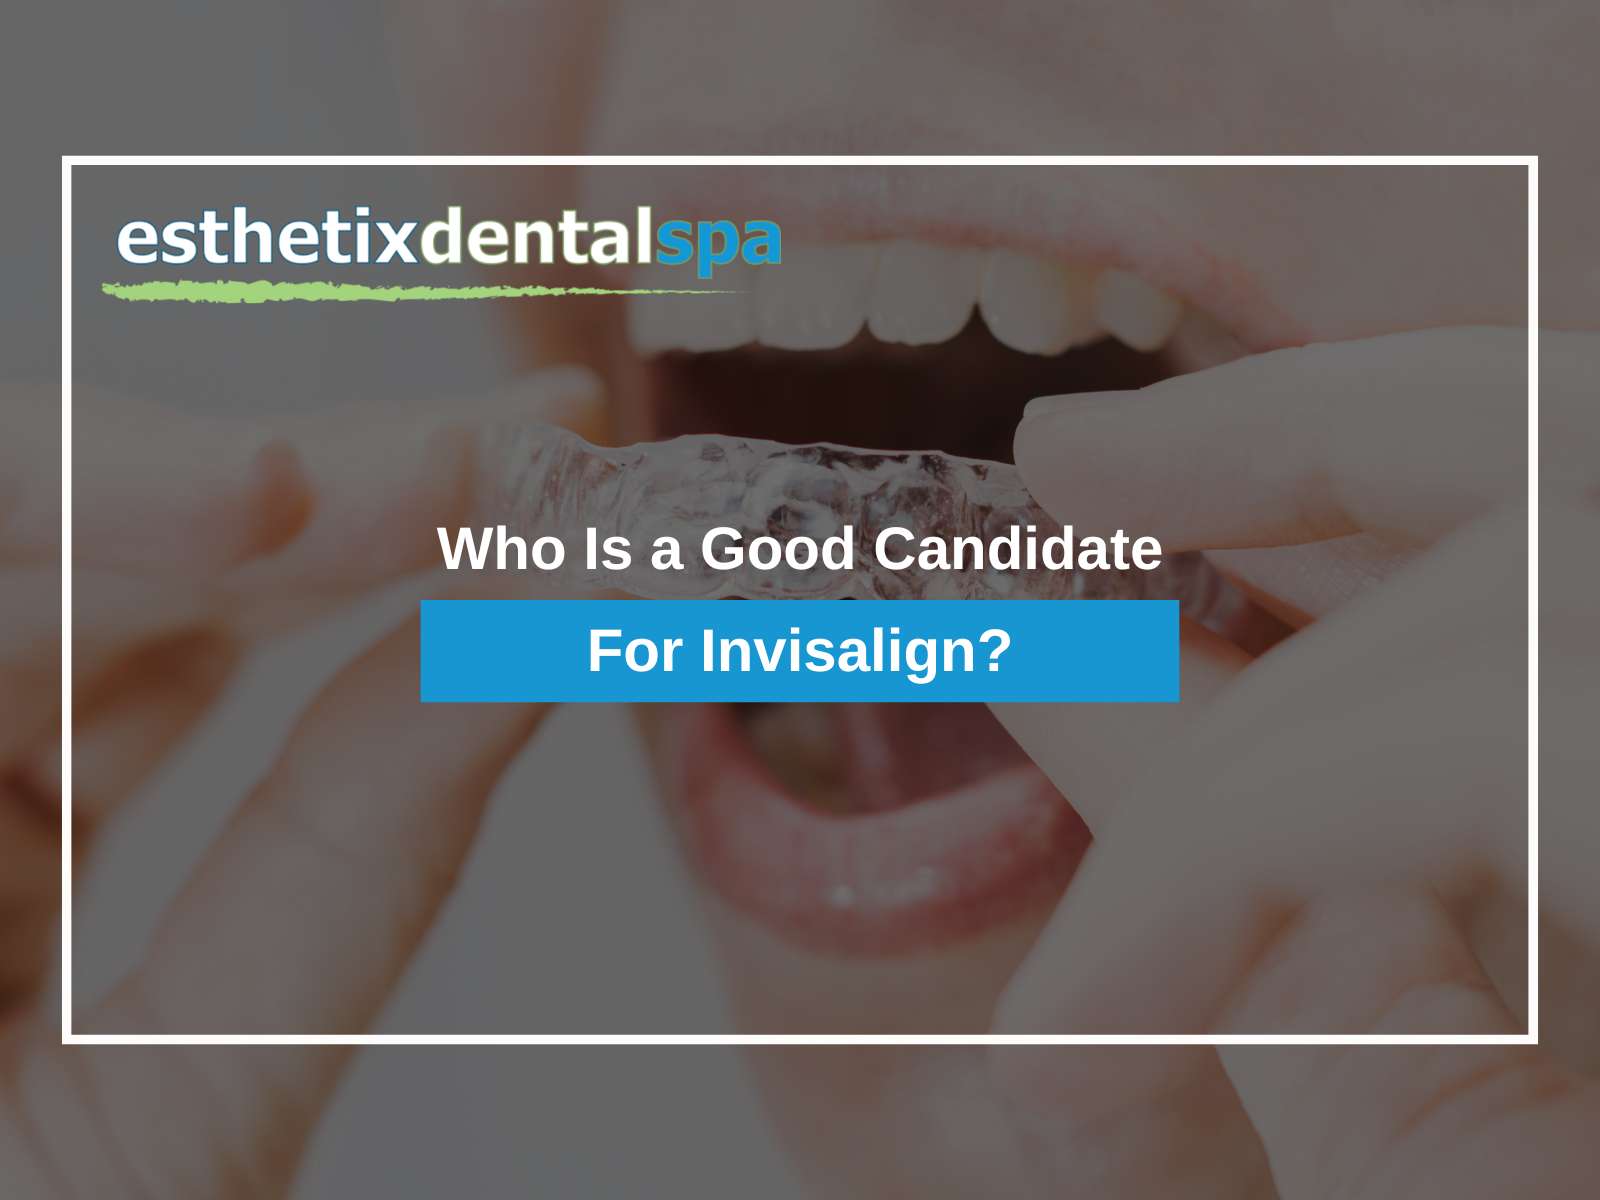 Who Is a Good Candidate For Invisalign?